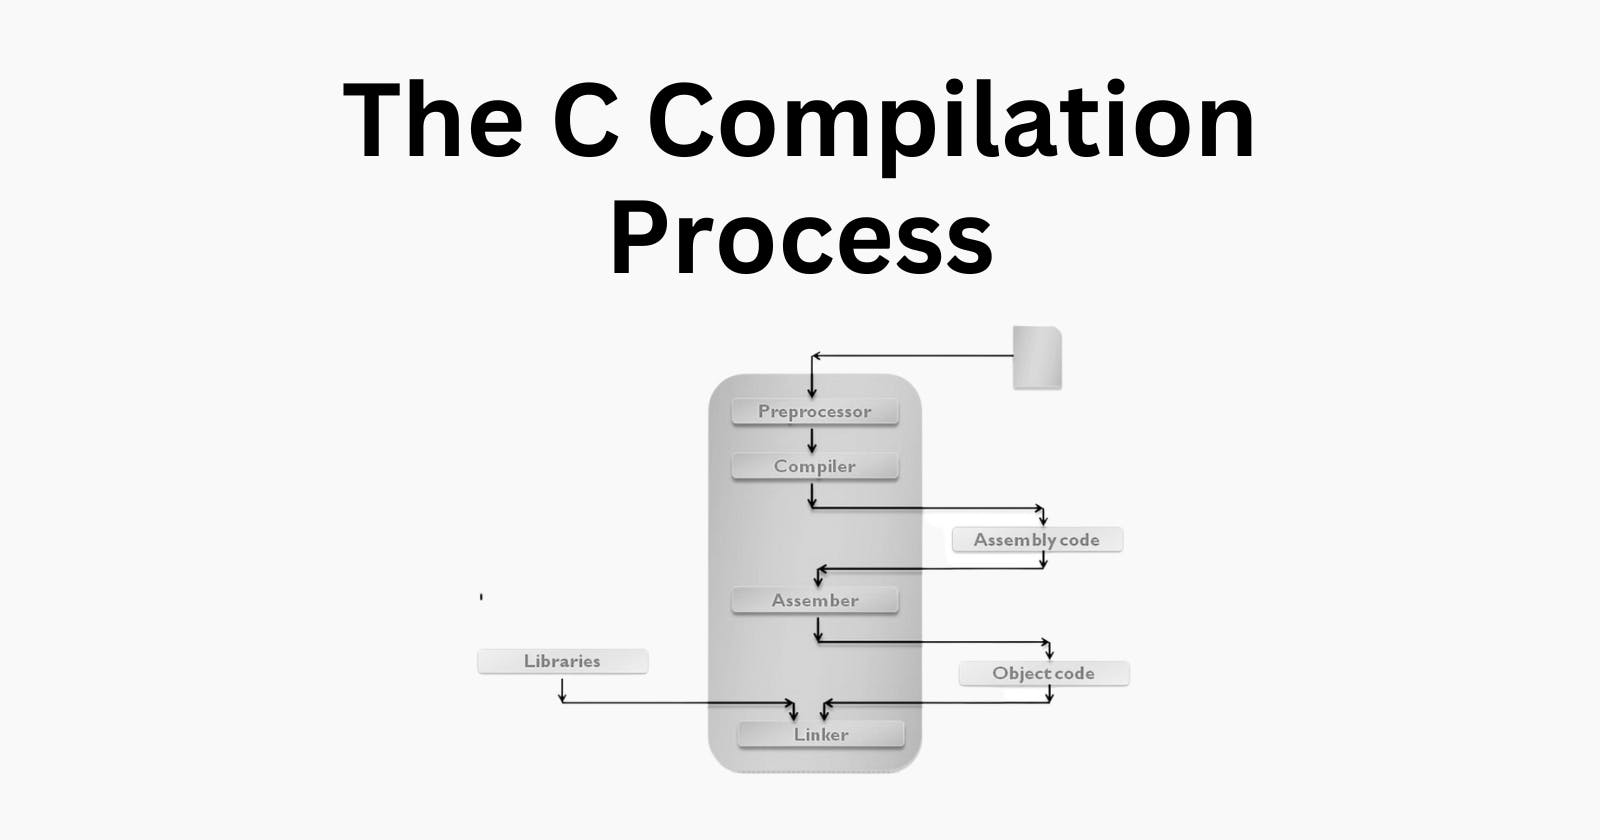 The C Compilation Process: A Step-by-Step Guide